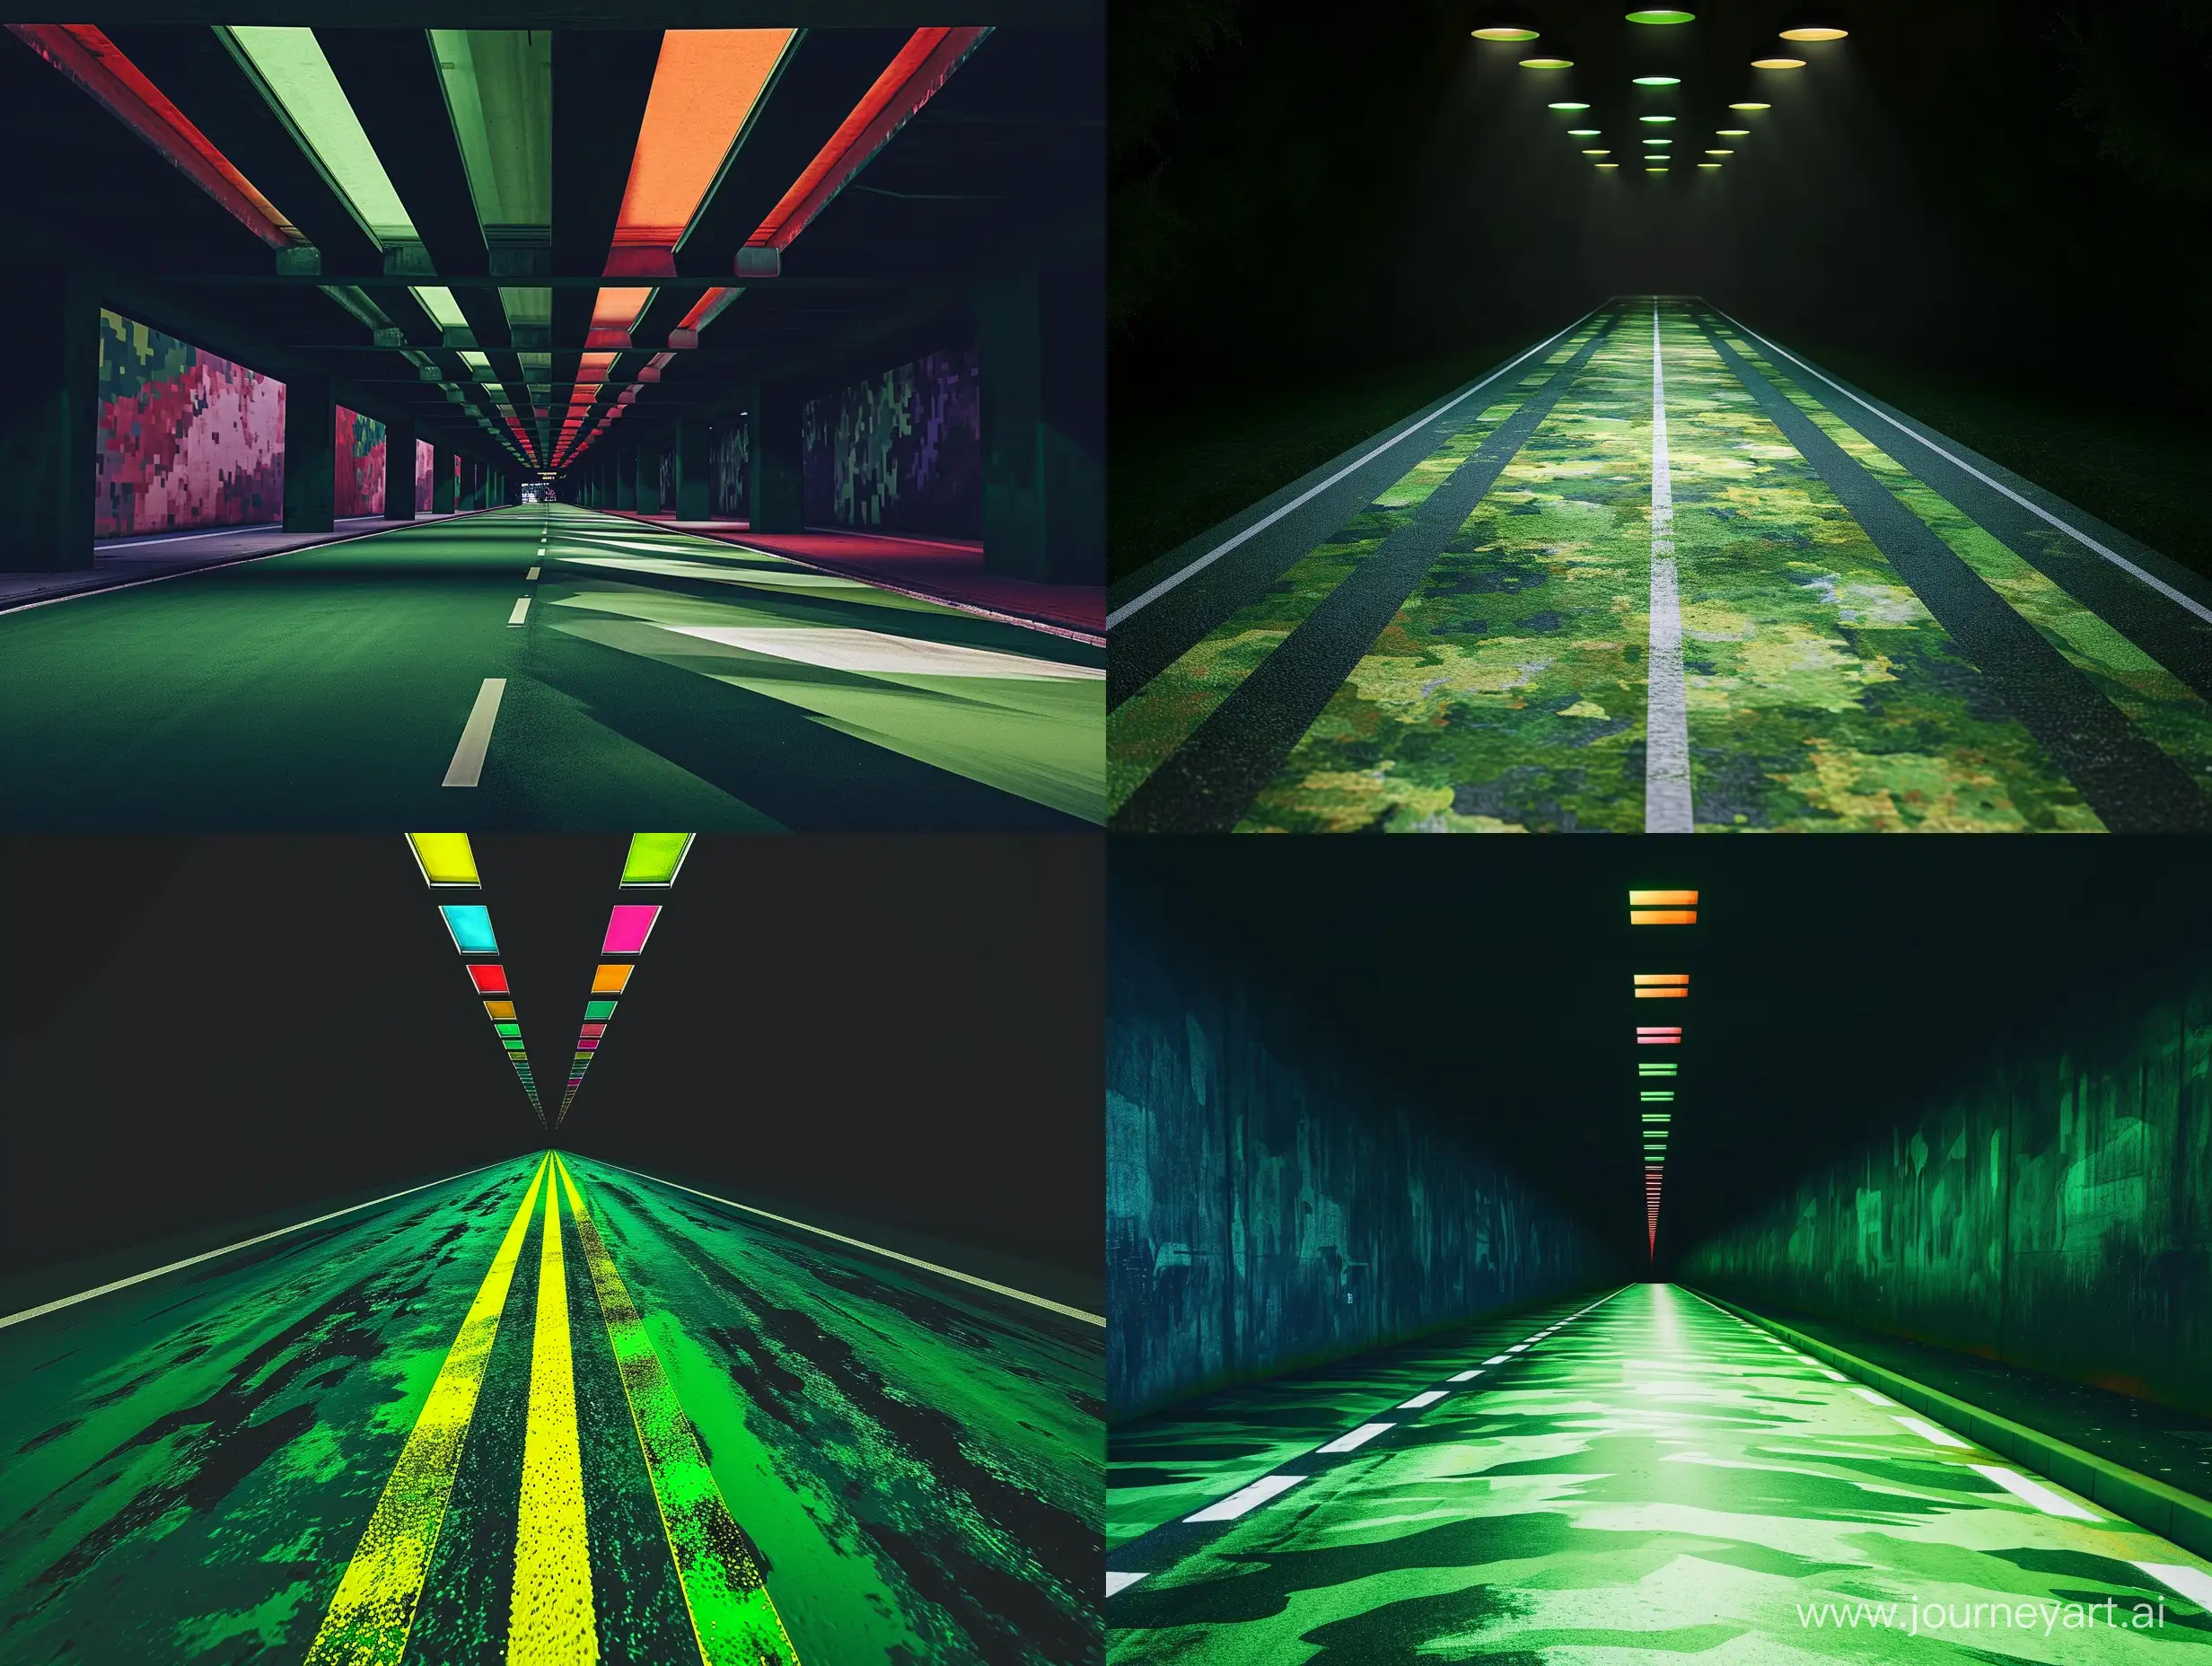 VERTICAL TRAFFIC LIGHT OF 5 COLORS ABOVE THE ROAD. The road is painted in green camouflage color and goes into DARKNESS